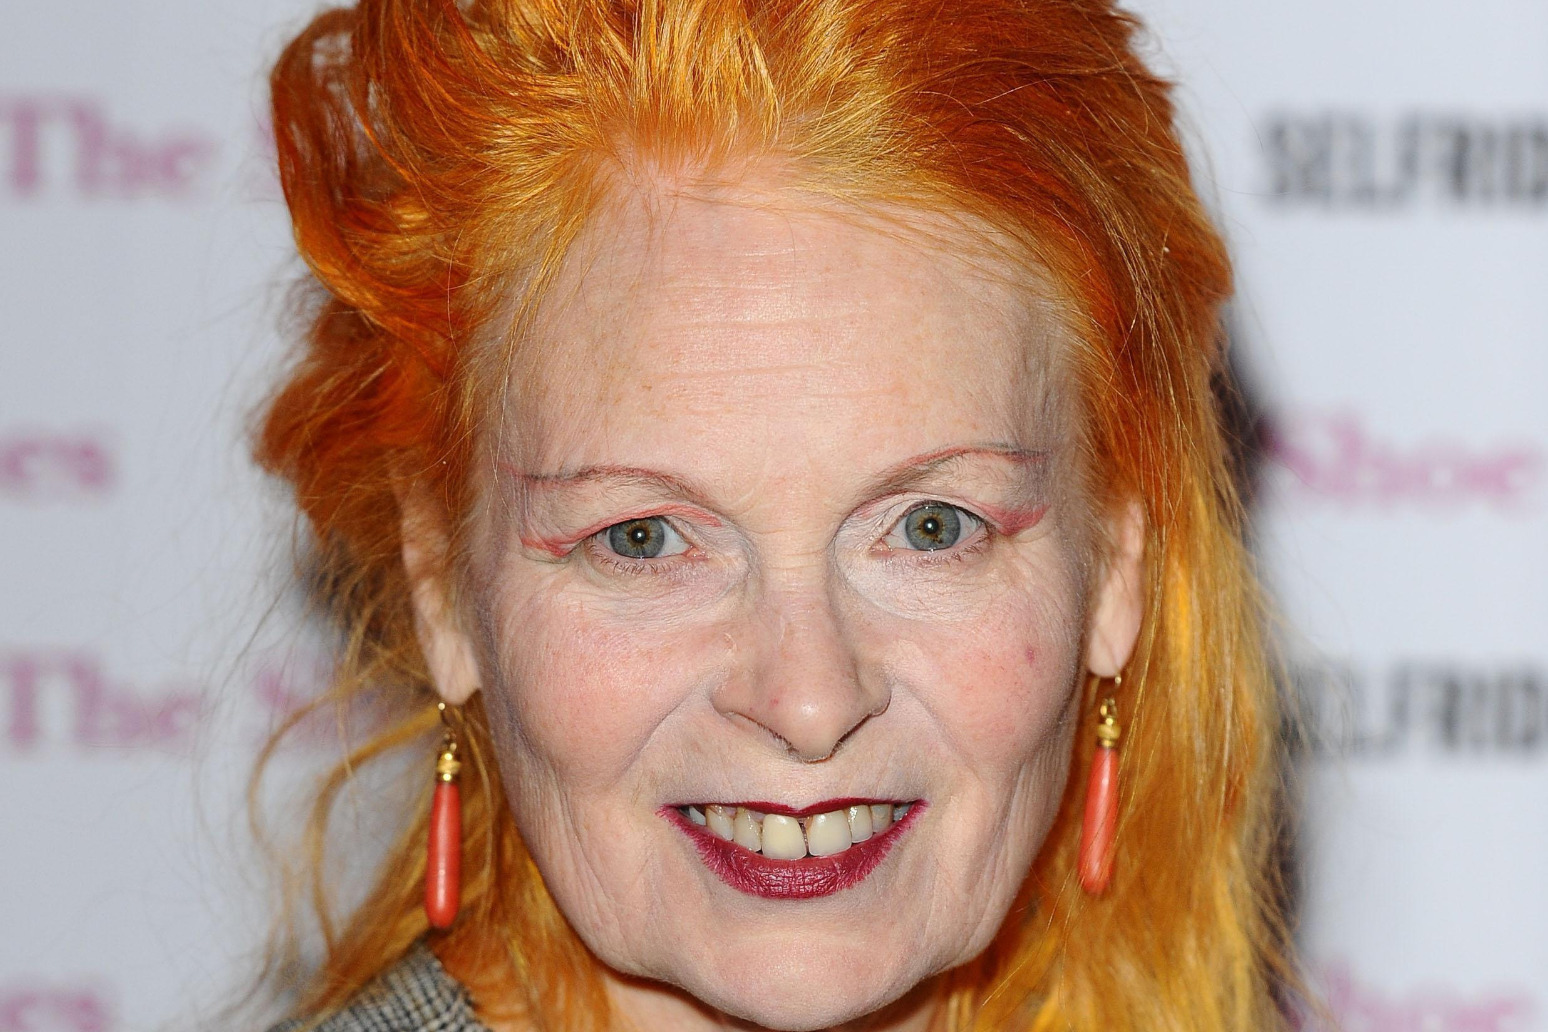 Fashion designer Dame Vivienne Westwood has died at the age of 81 